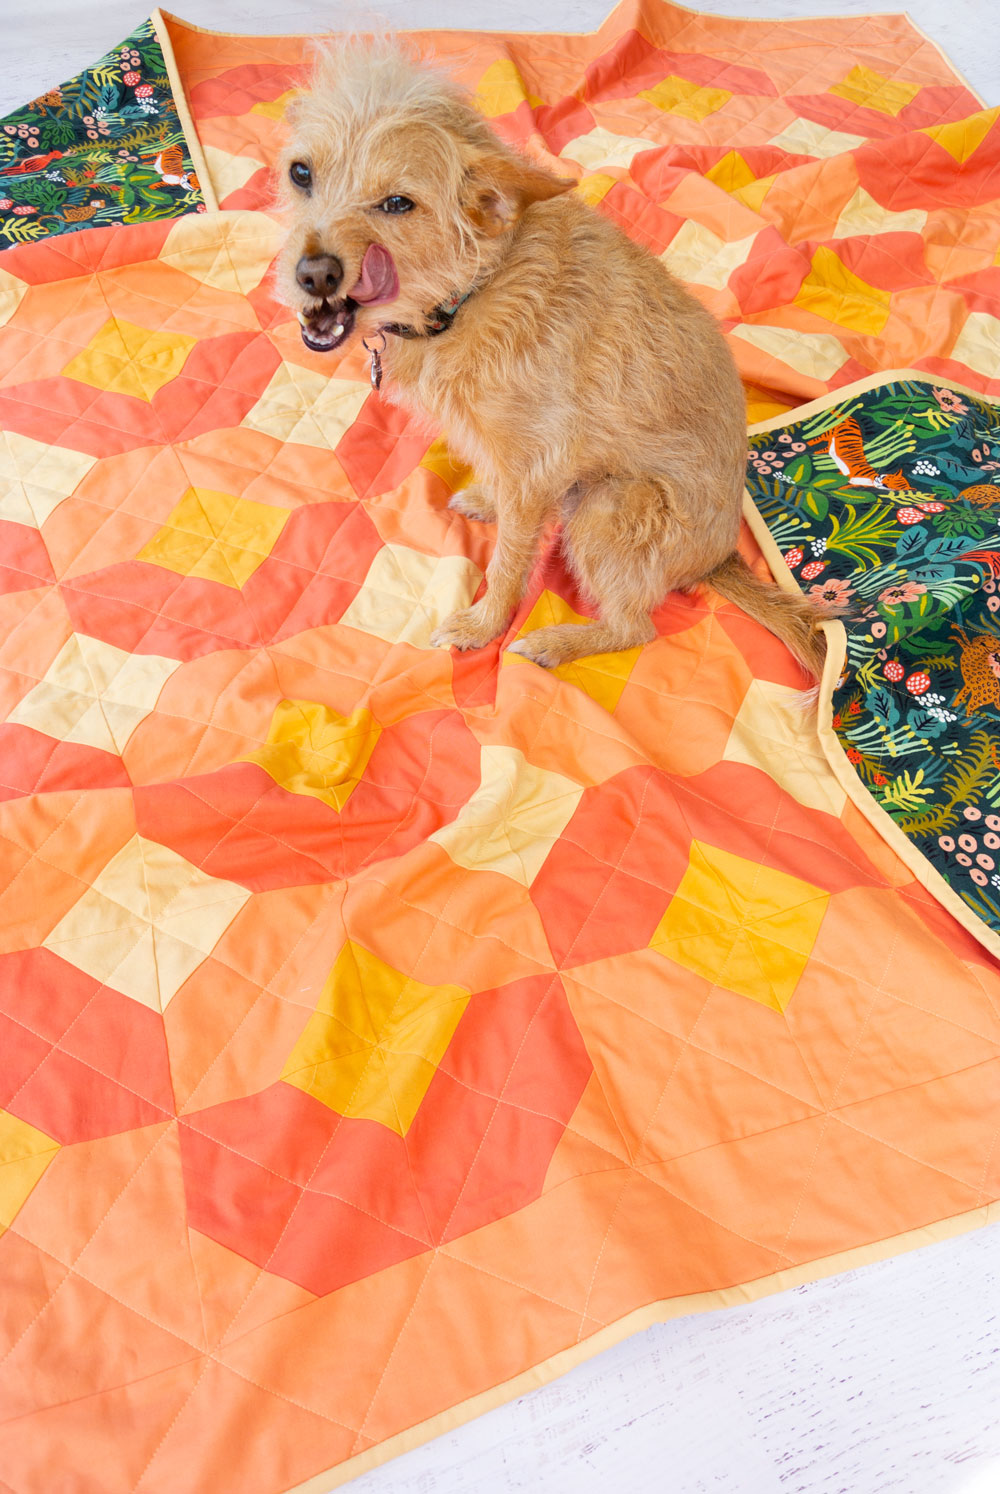 The Glitter and Glow quilt pattern is fun and versatile. Use yardage, fat quarters, or scraps you have in your stash! This peachy mango glow kit is backed with Rifle Paper Co. canvas and uses jersey rather than batting to create the perfect outdoor quilt.